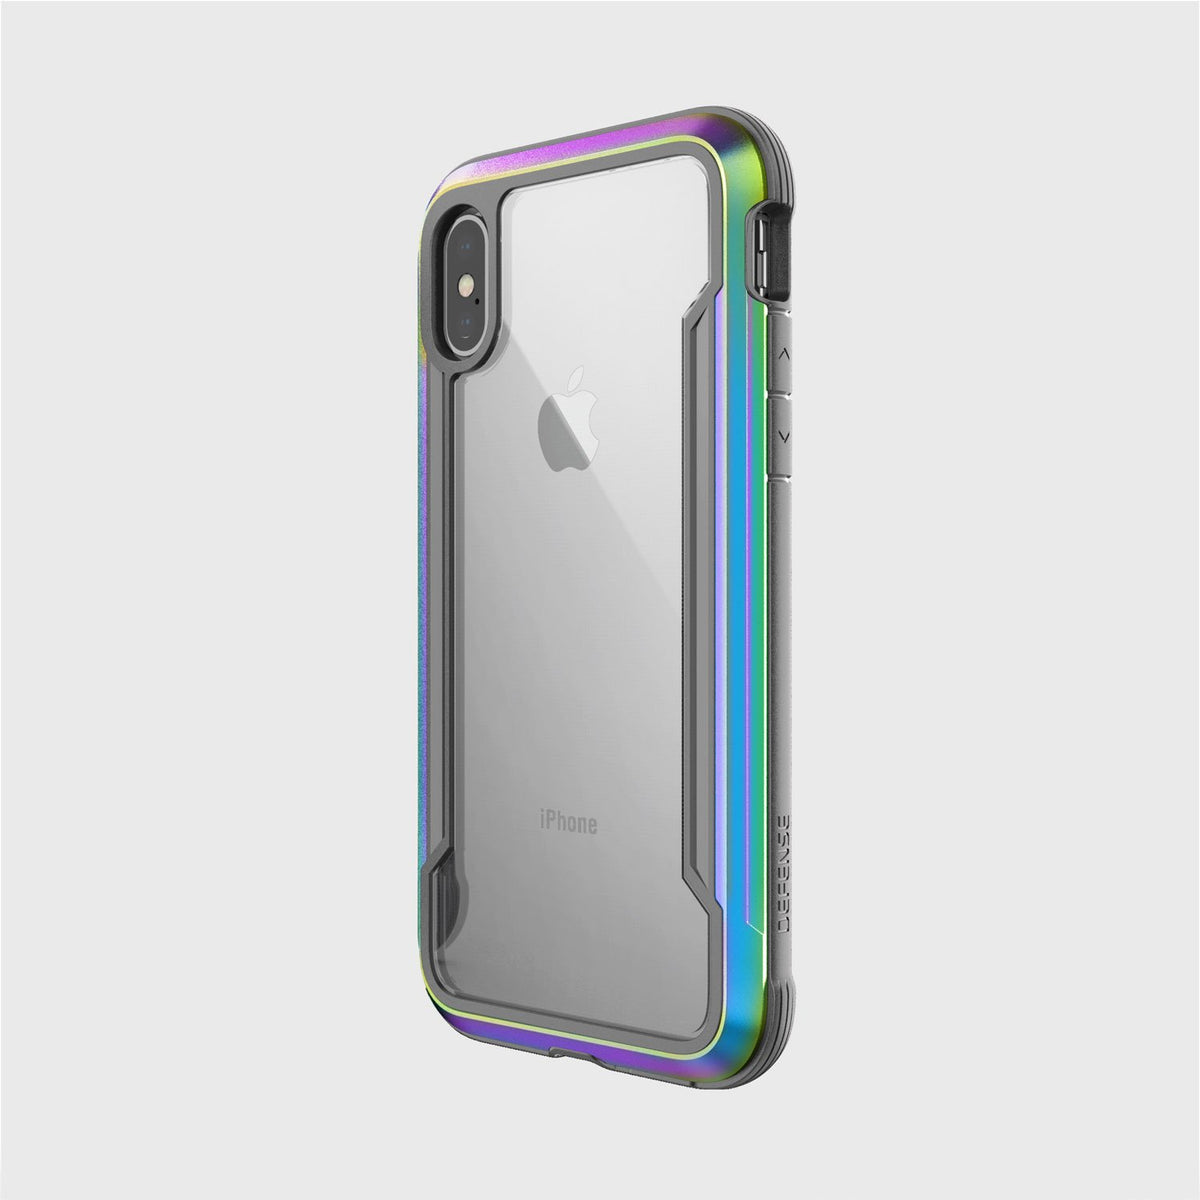 A vibrant iPhone XS Max Case - SHIELD with rainbow colors and drop protection, featuring a Raptic Shield design.